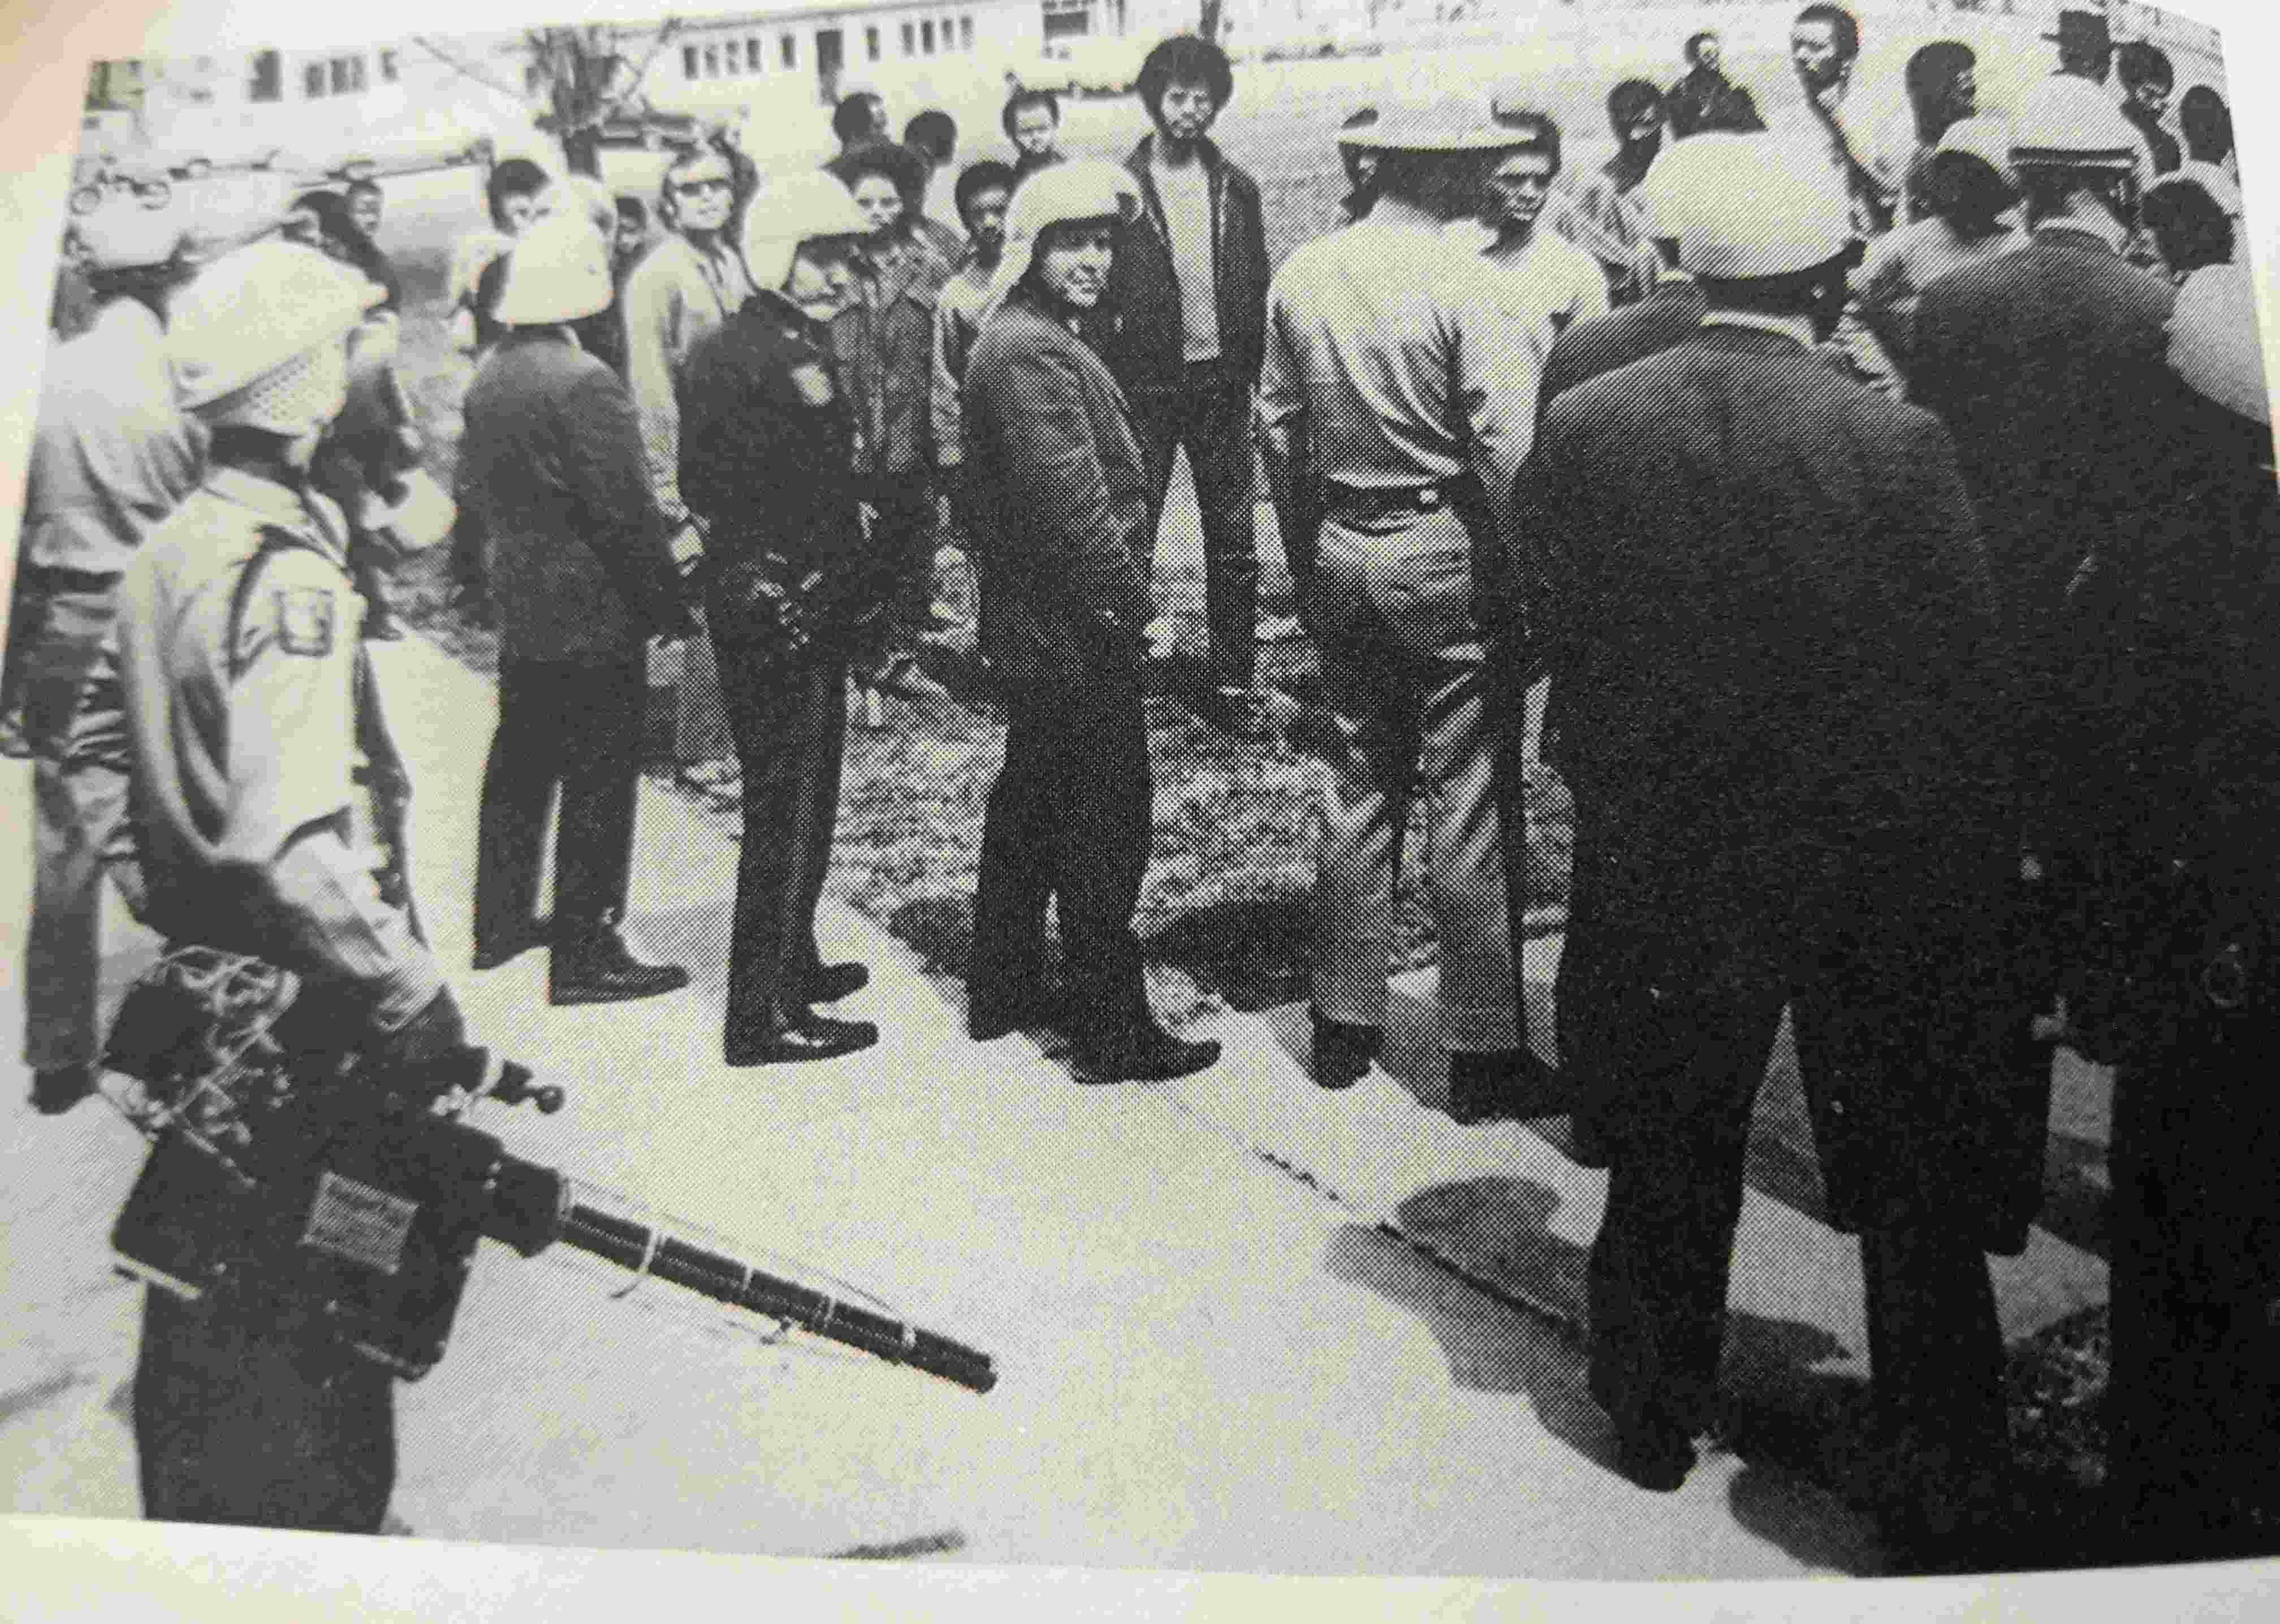 yellowed B/W faded image of police officers standing on a T of a sidewalk blocking the space from a group of predominately Black young people, who are standing behind them on the grass and facing the camera. Behind them are some cars and houses across a stree. The officer in the front left of the frame is carrying a Pepper Fog GOEC fogger.